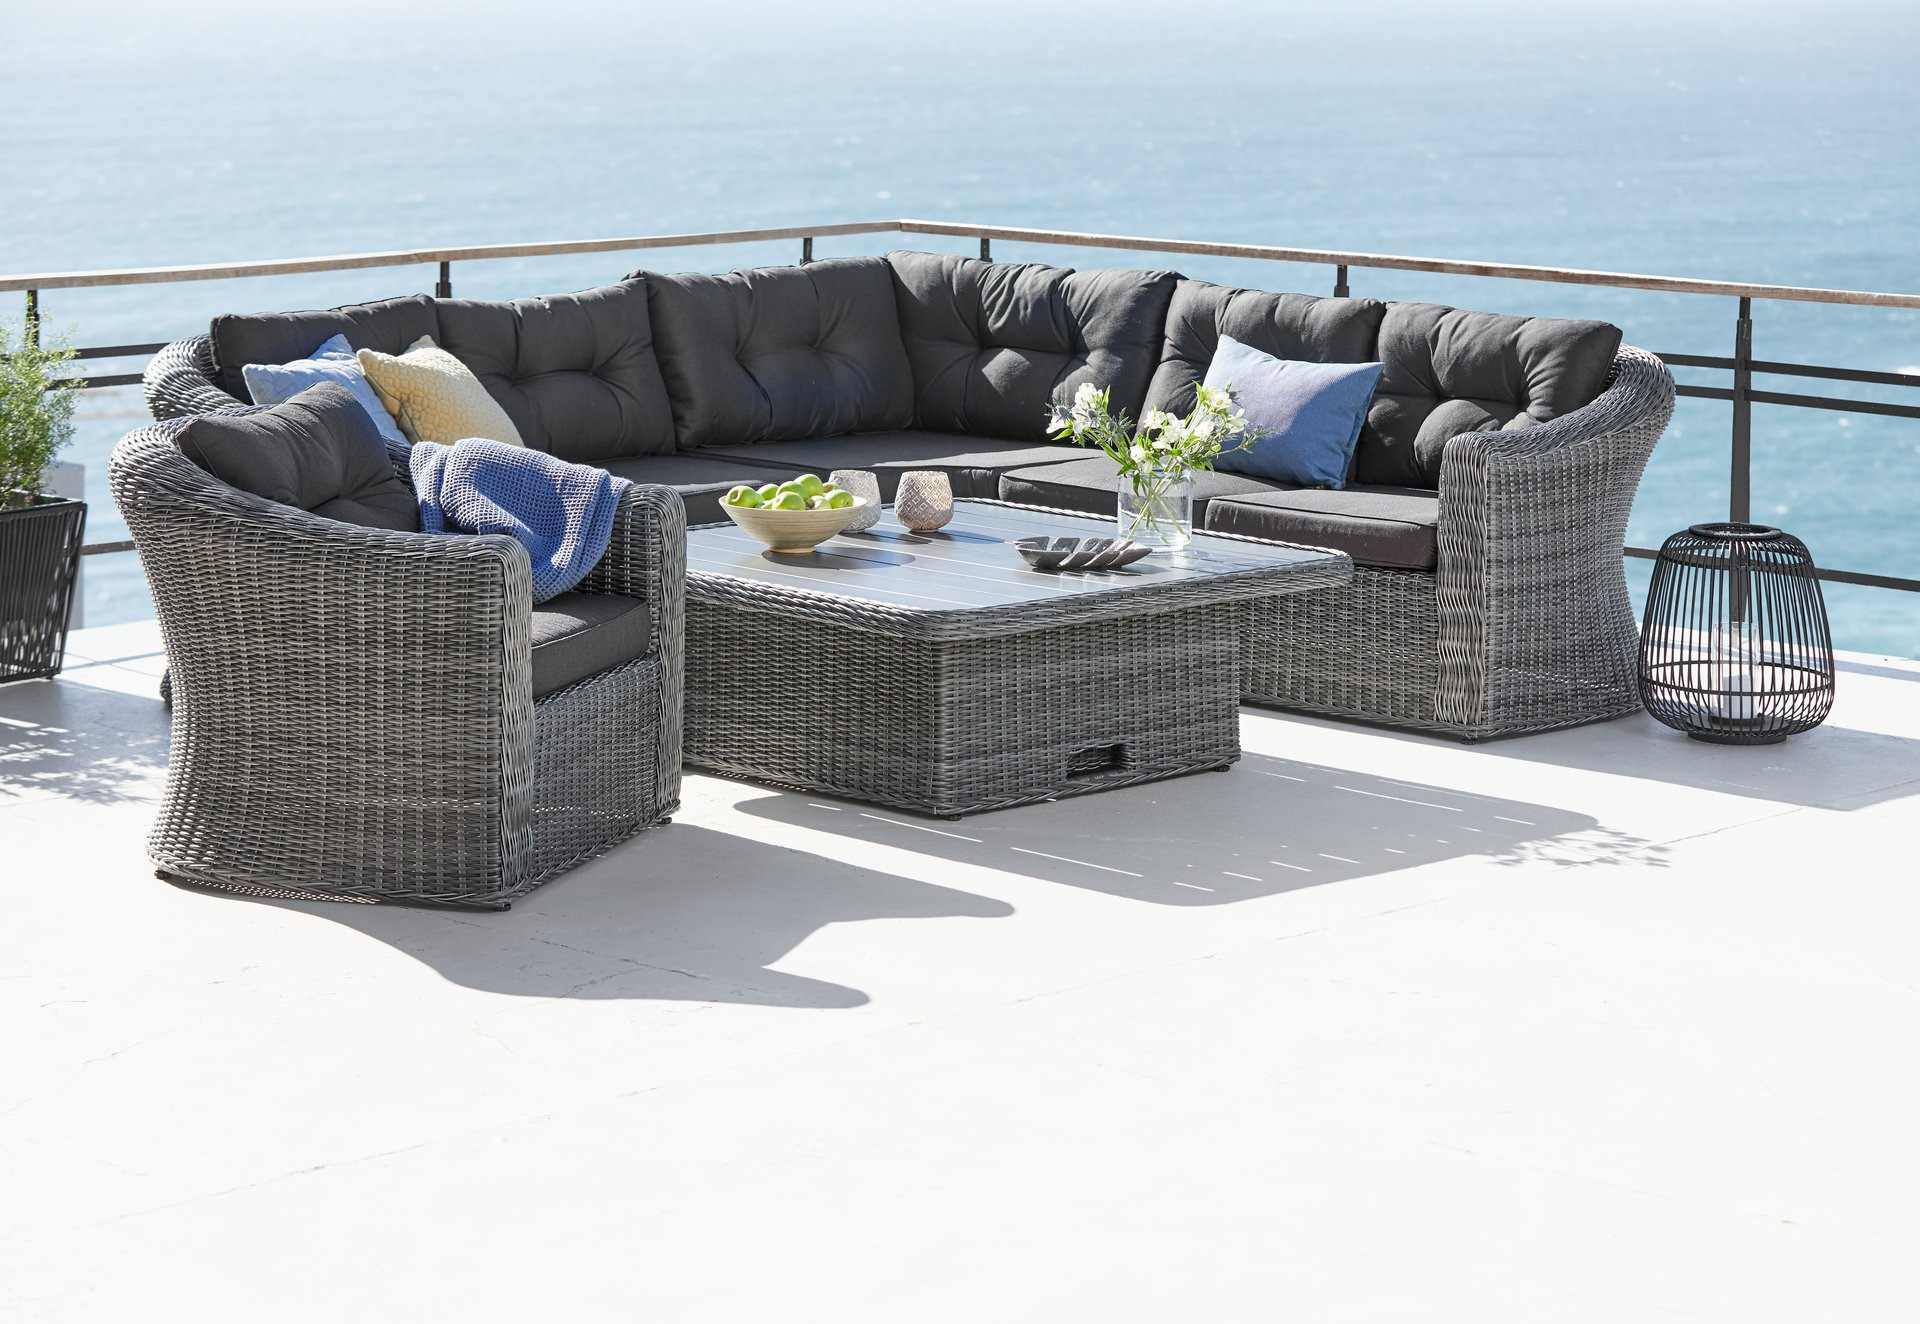 Grey garden lounge set with corner sofa, chair and adjustable table